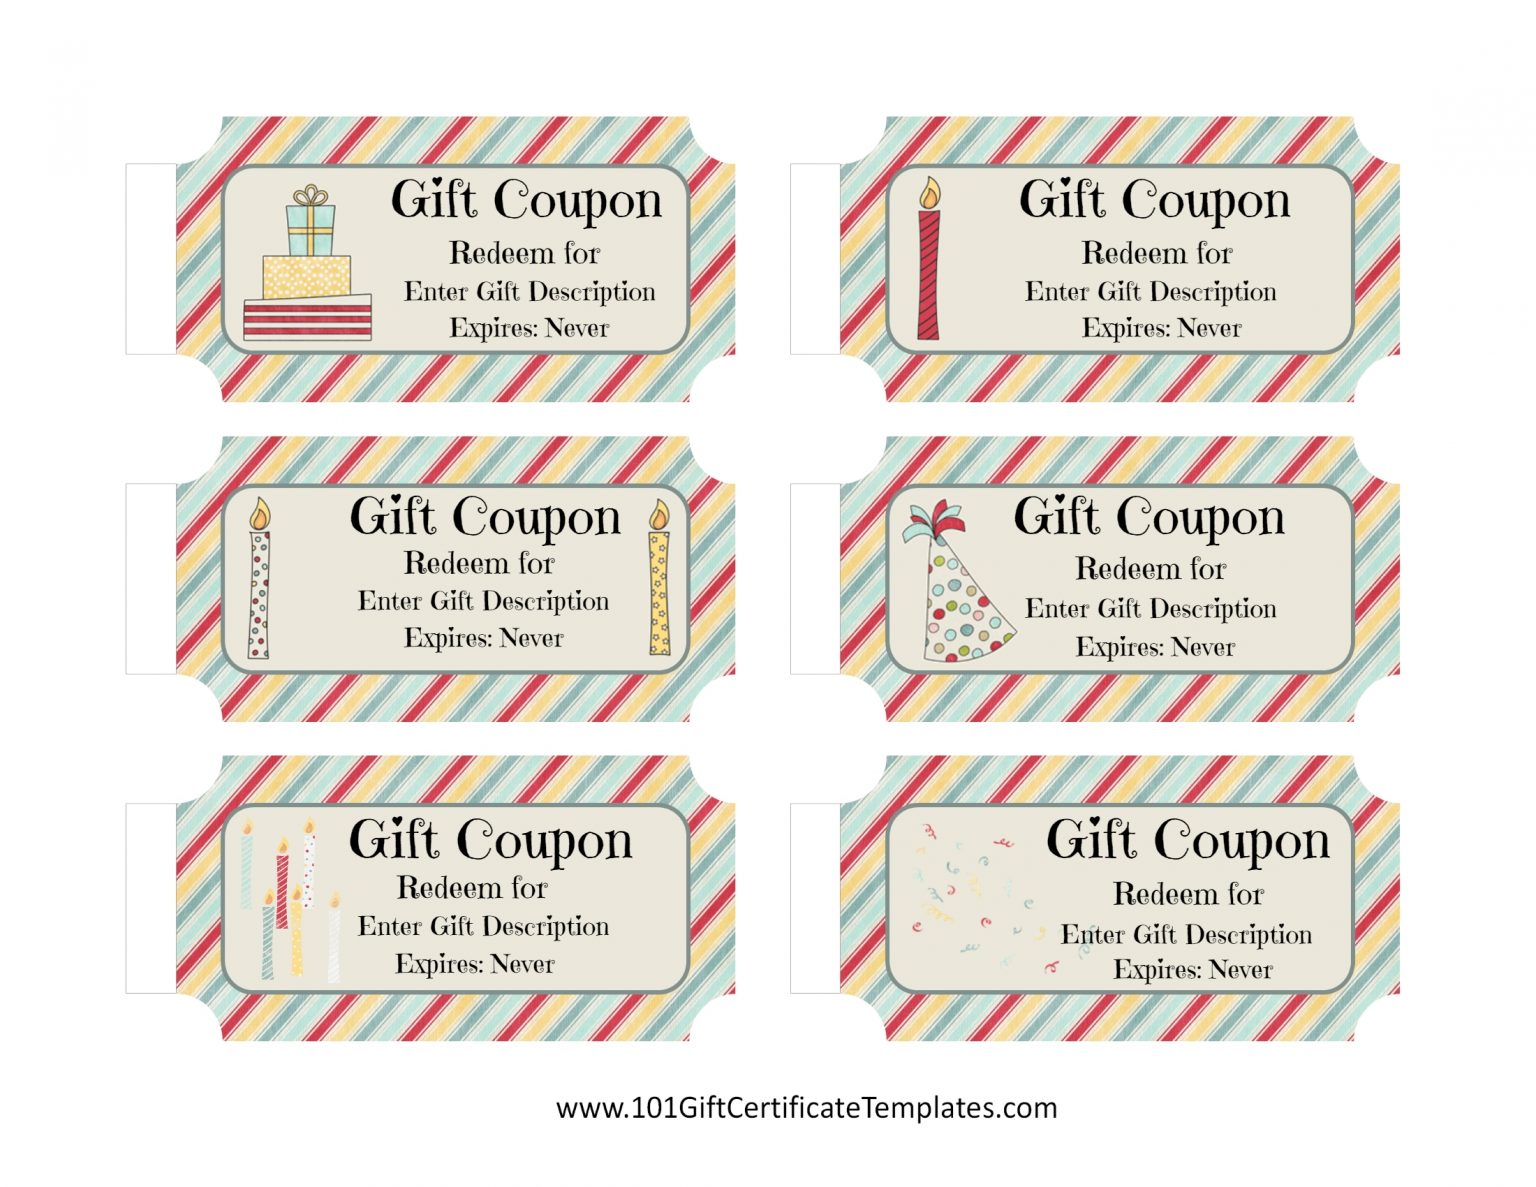 free-birthday-coupon-template-customize-online-print